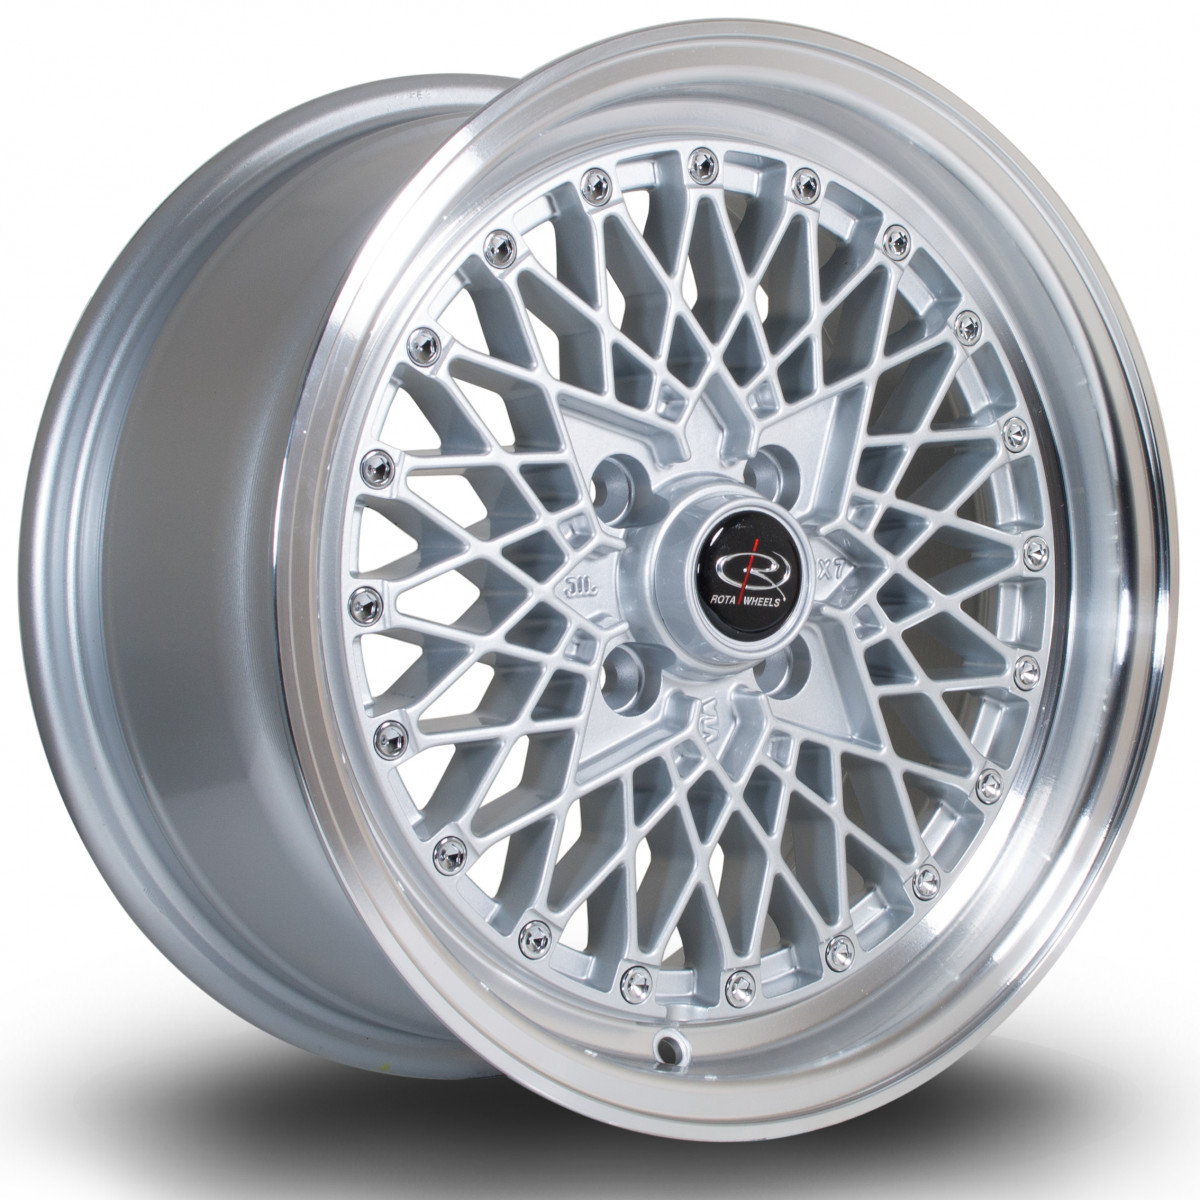 OSMesh 15x7 4x100 ET30 Silver with Polished Lip